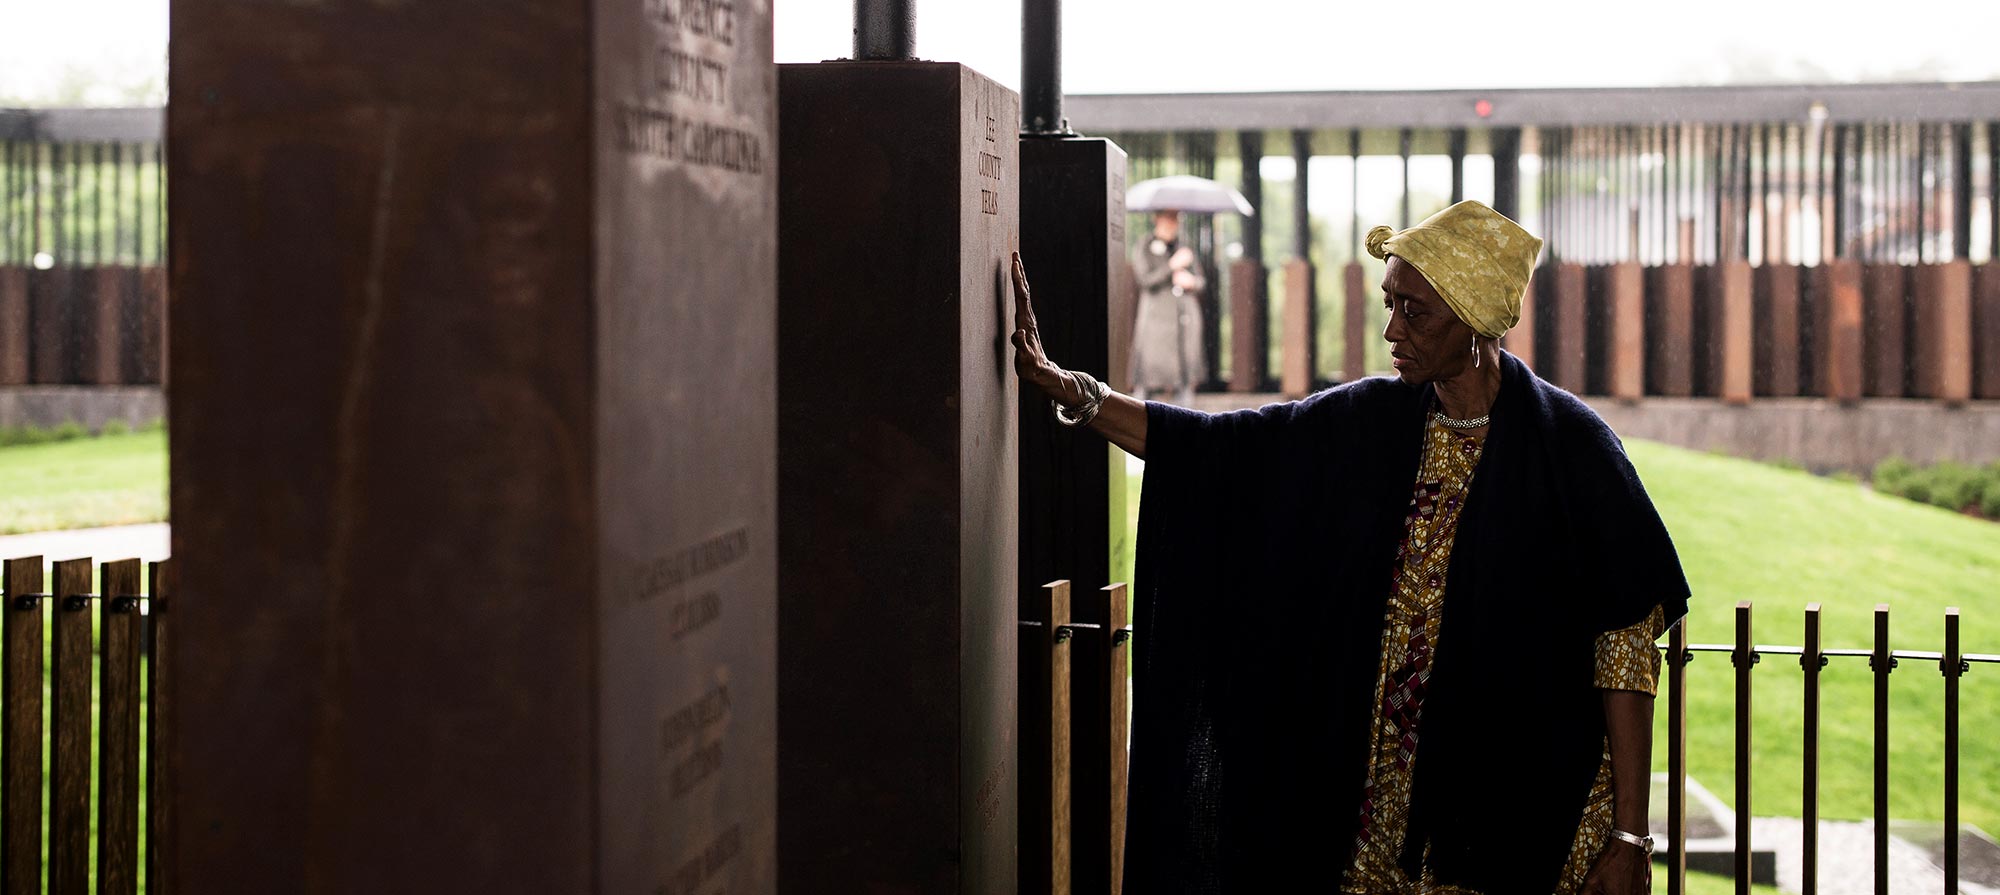 A woman solemnly places her hand on a monument in the National Memorial for Peace and Justice that recognizes the racial terror lynching of her ancestor.